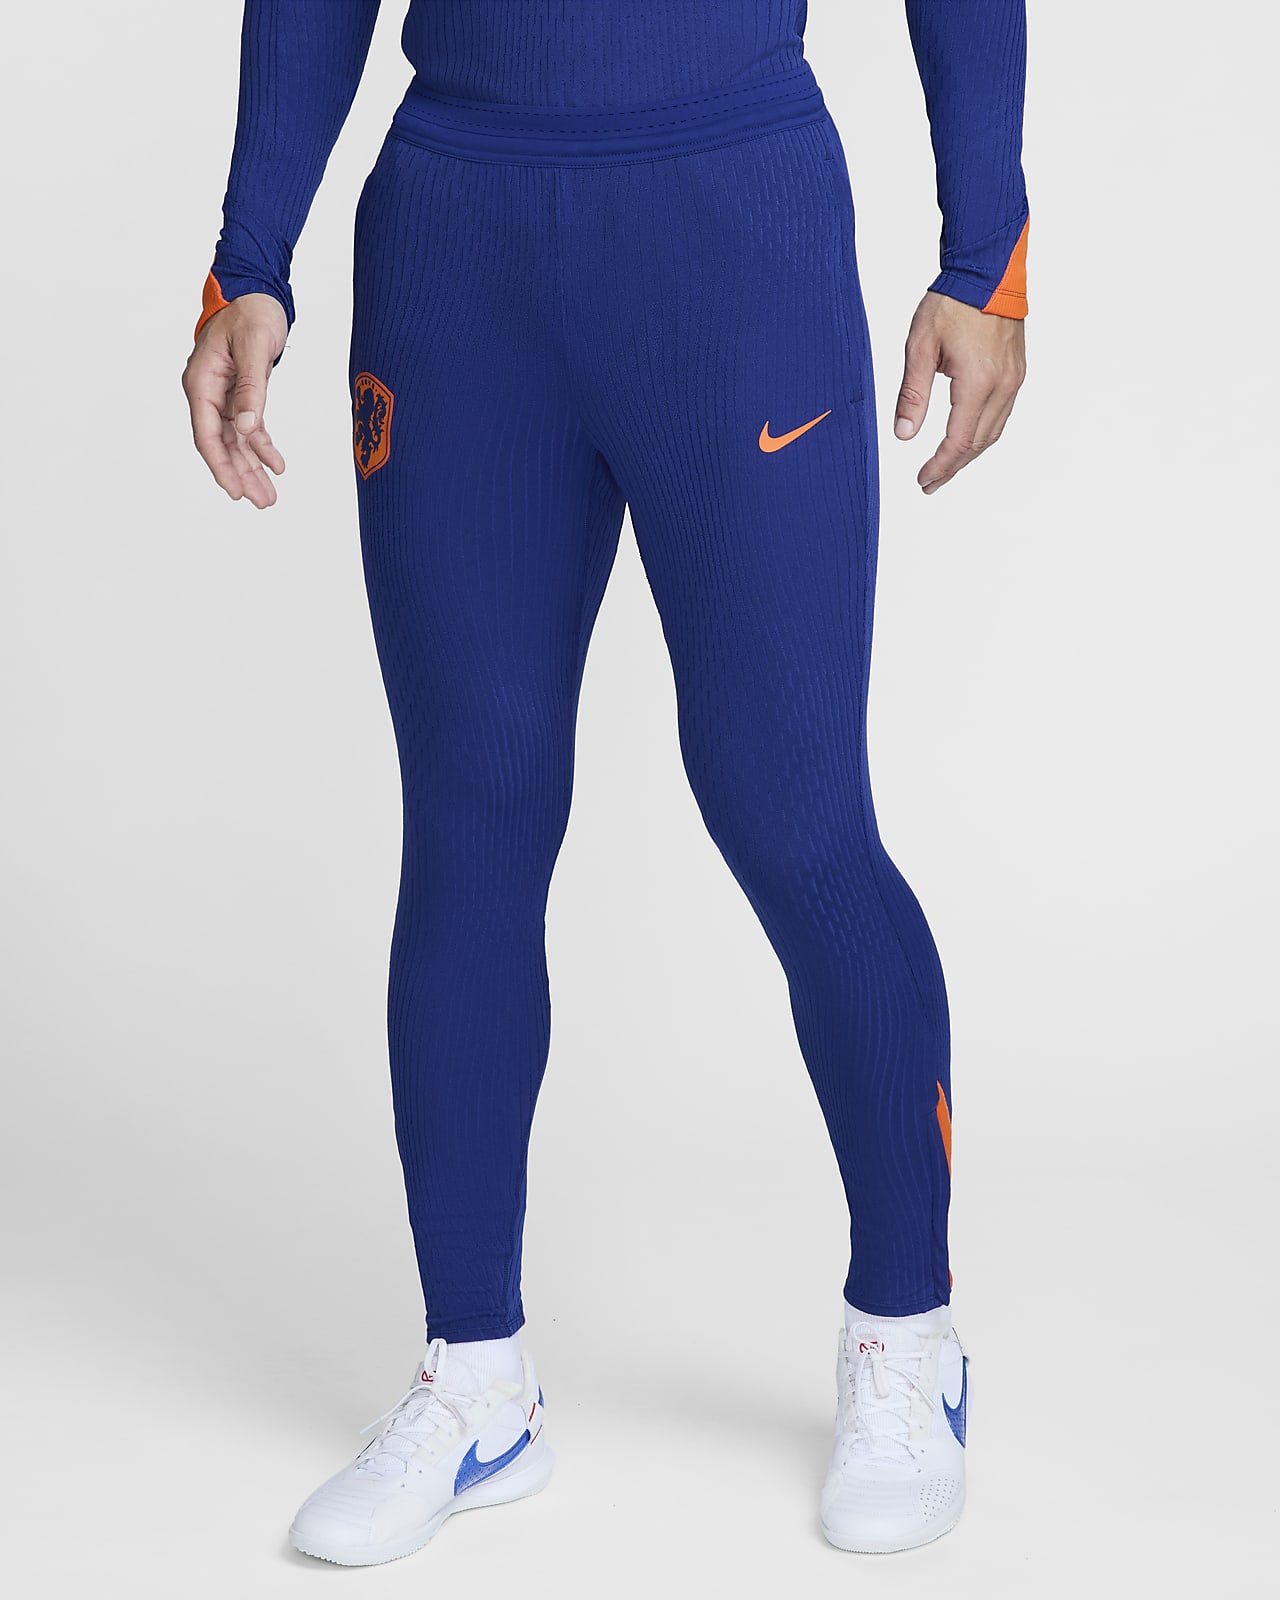 Nike Strike Knit Pant with Pockets and Zippers